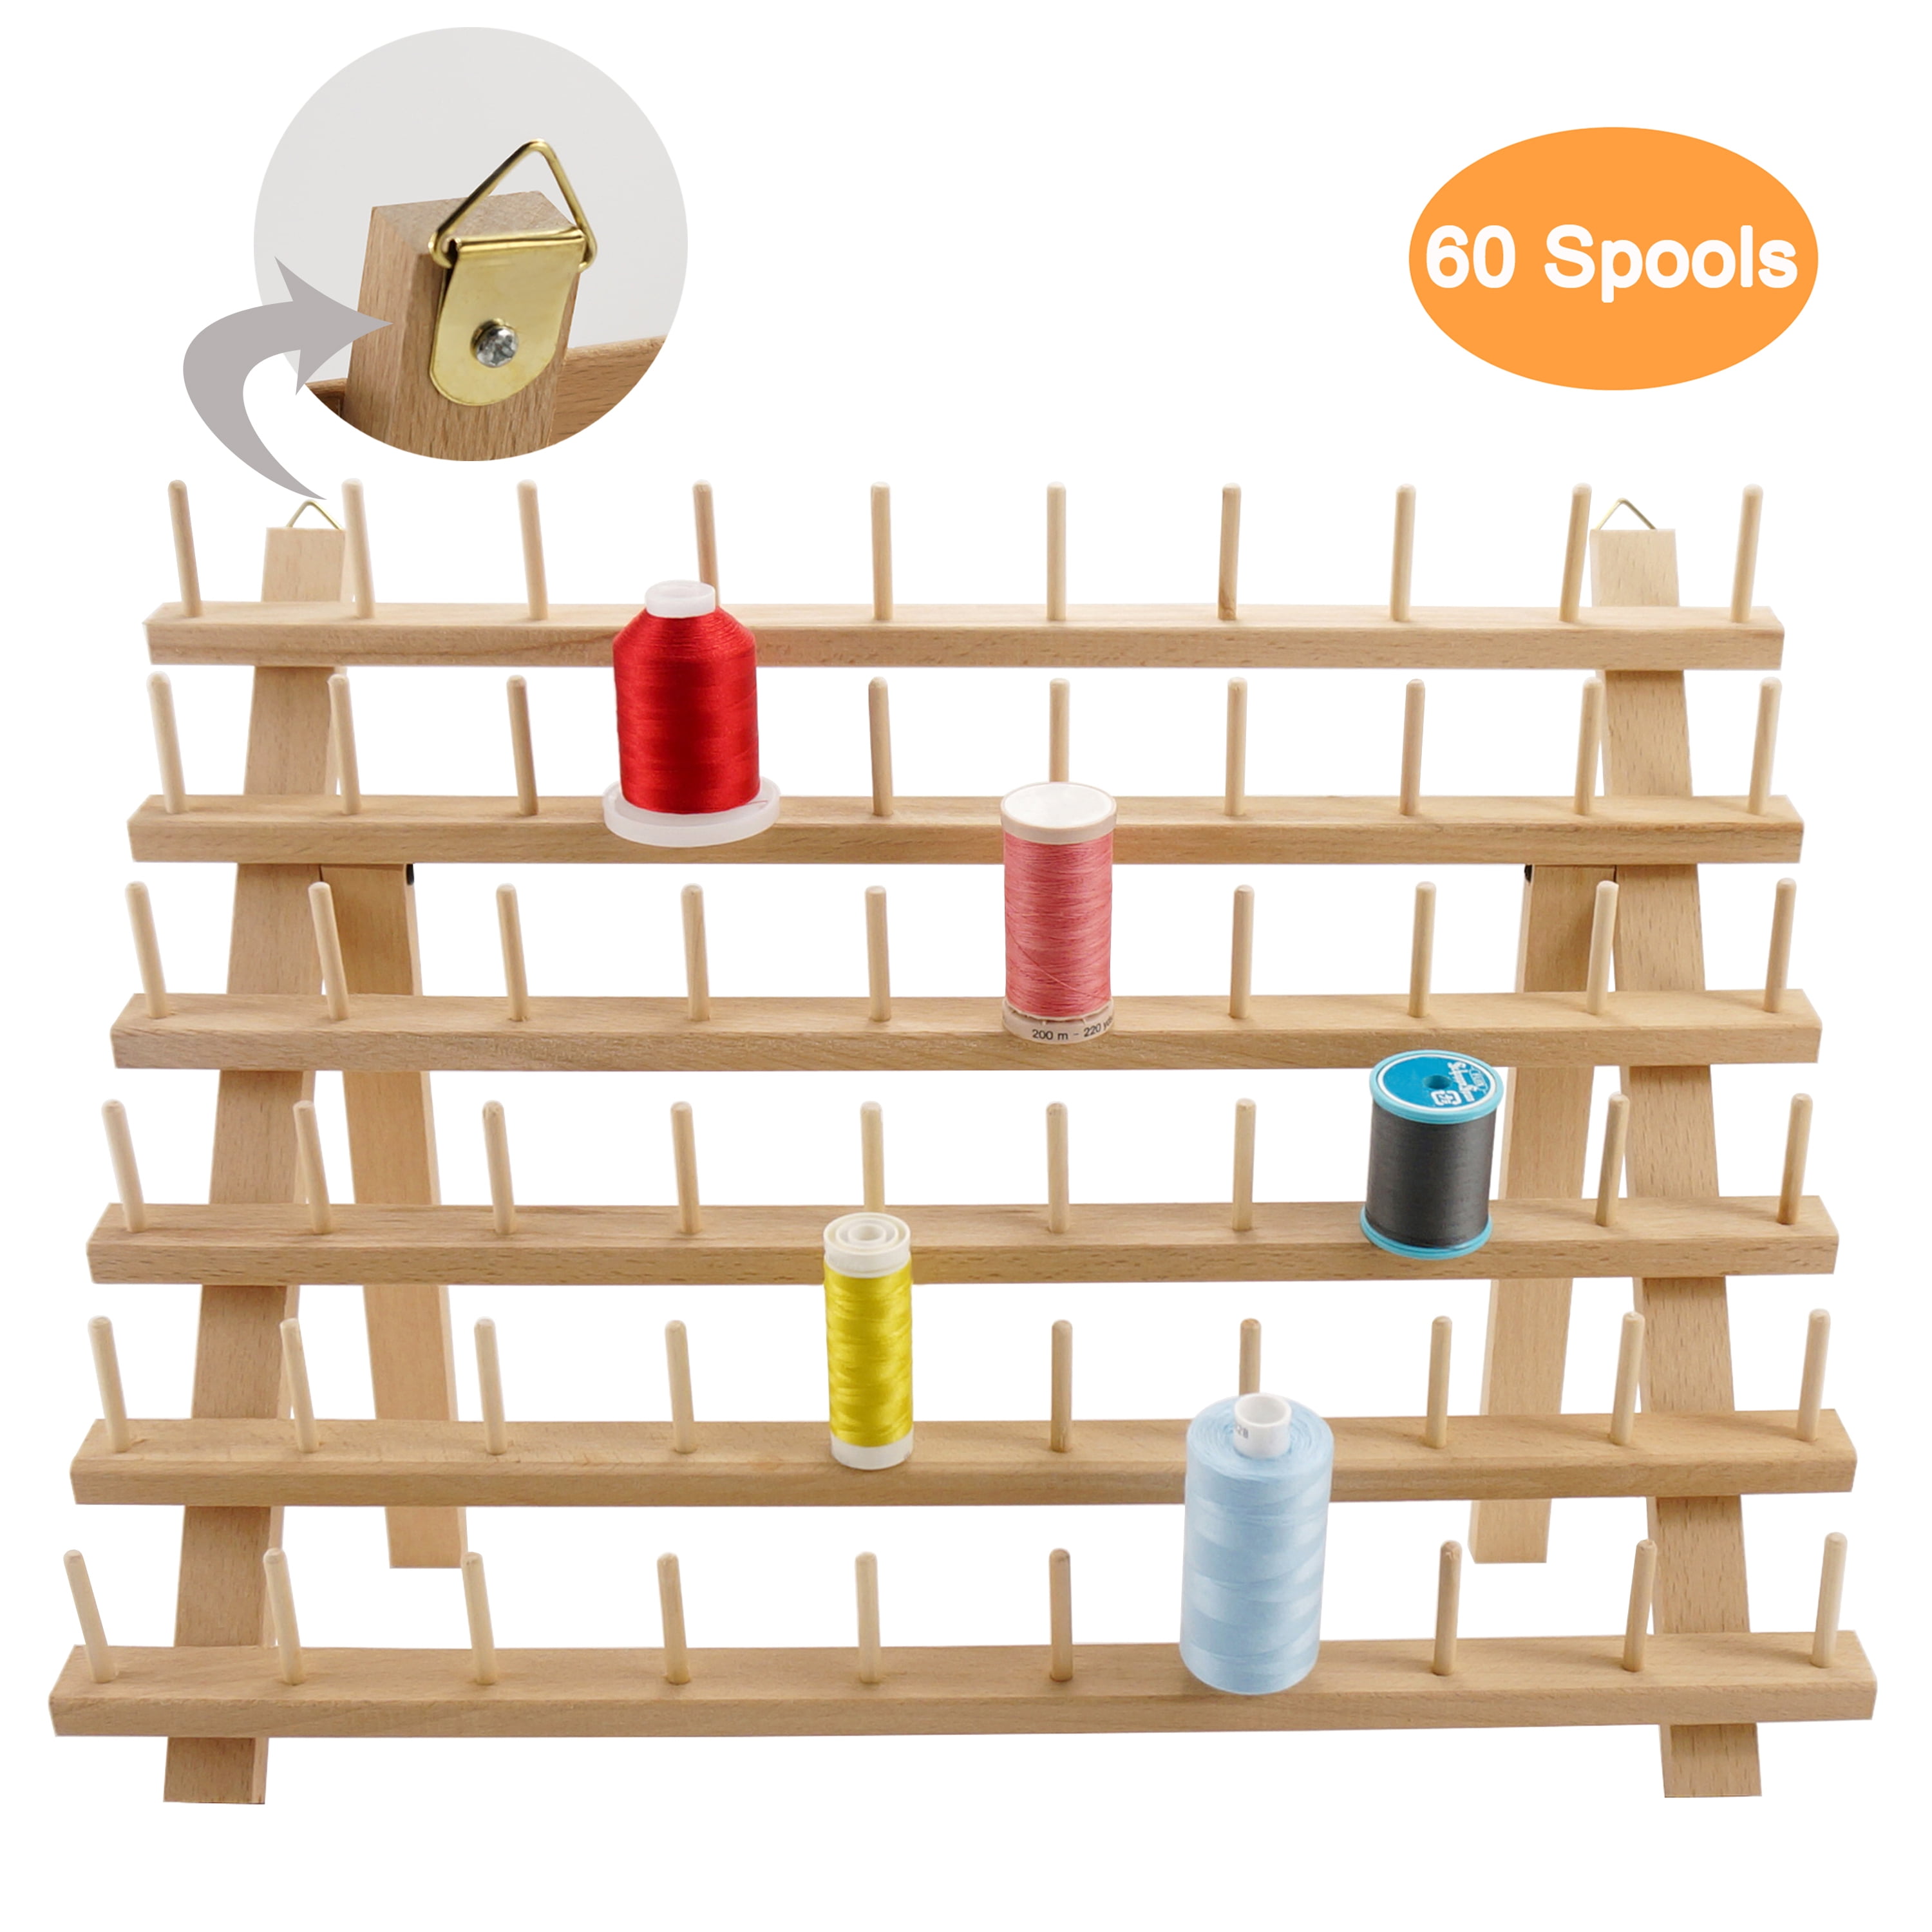 Baby Thread Rack 12 Spools Wooden Thread Rack/Thread Holder Organizer with Hanging Hooks for Sewing Mother Embroidery Hair-braiding Quilting New brothread 60 Spools 